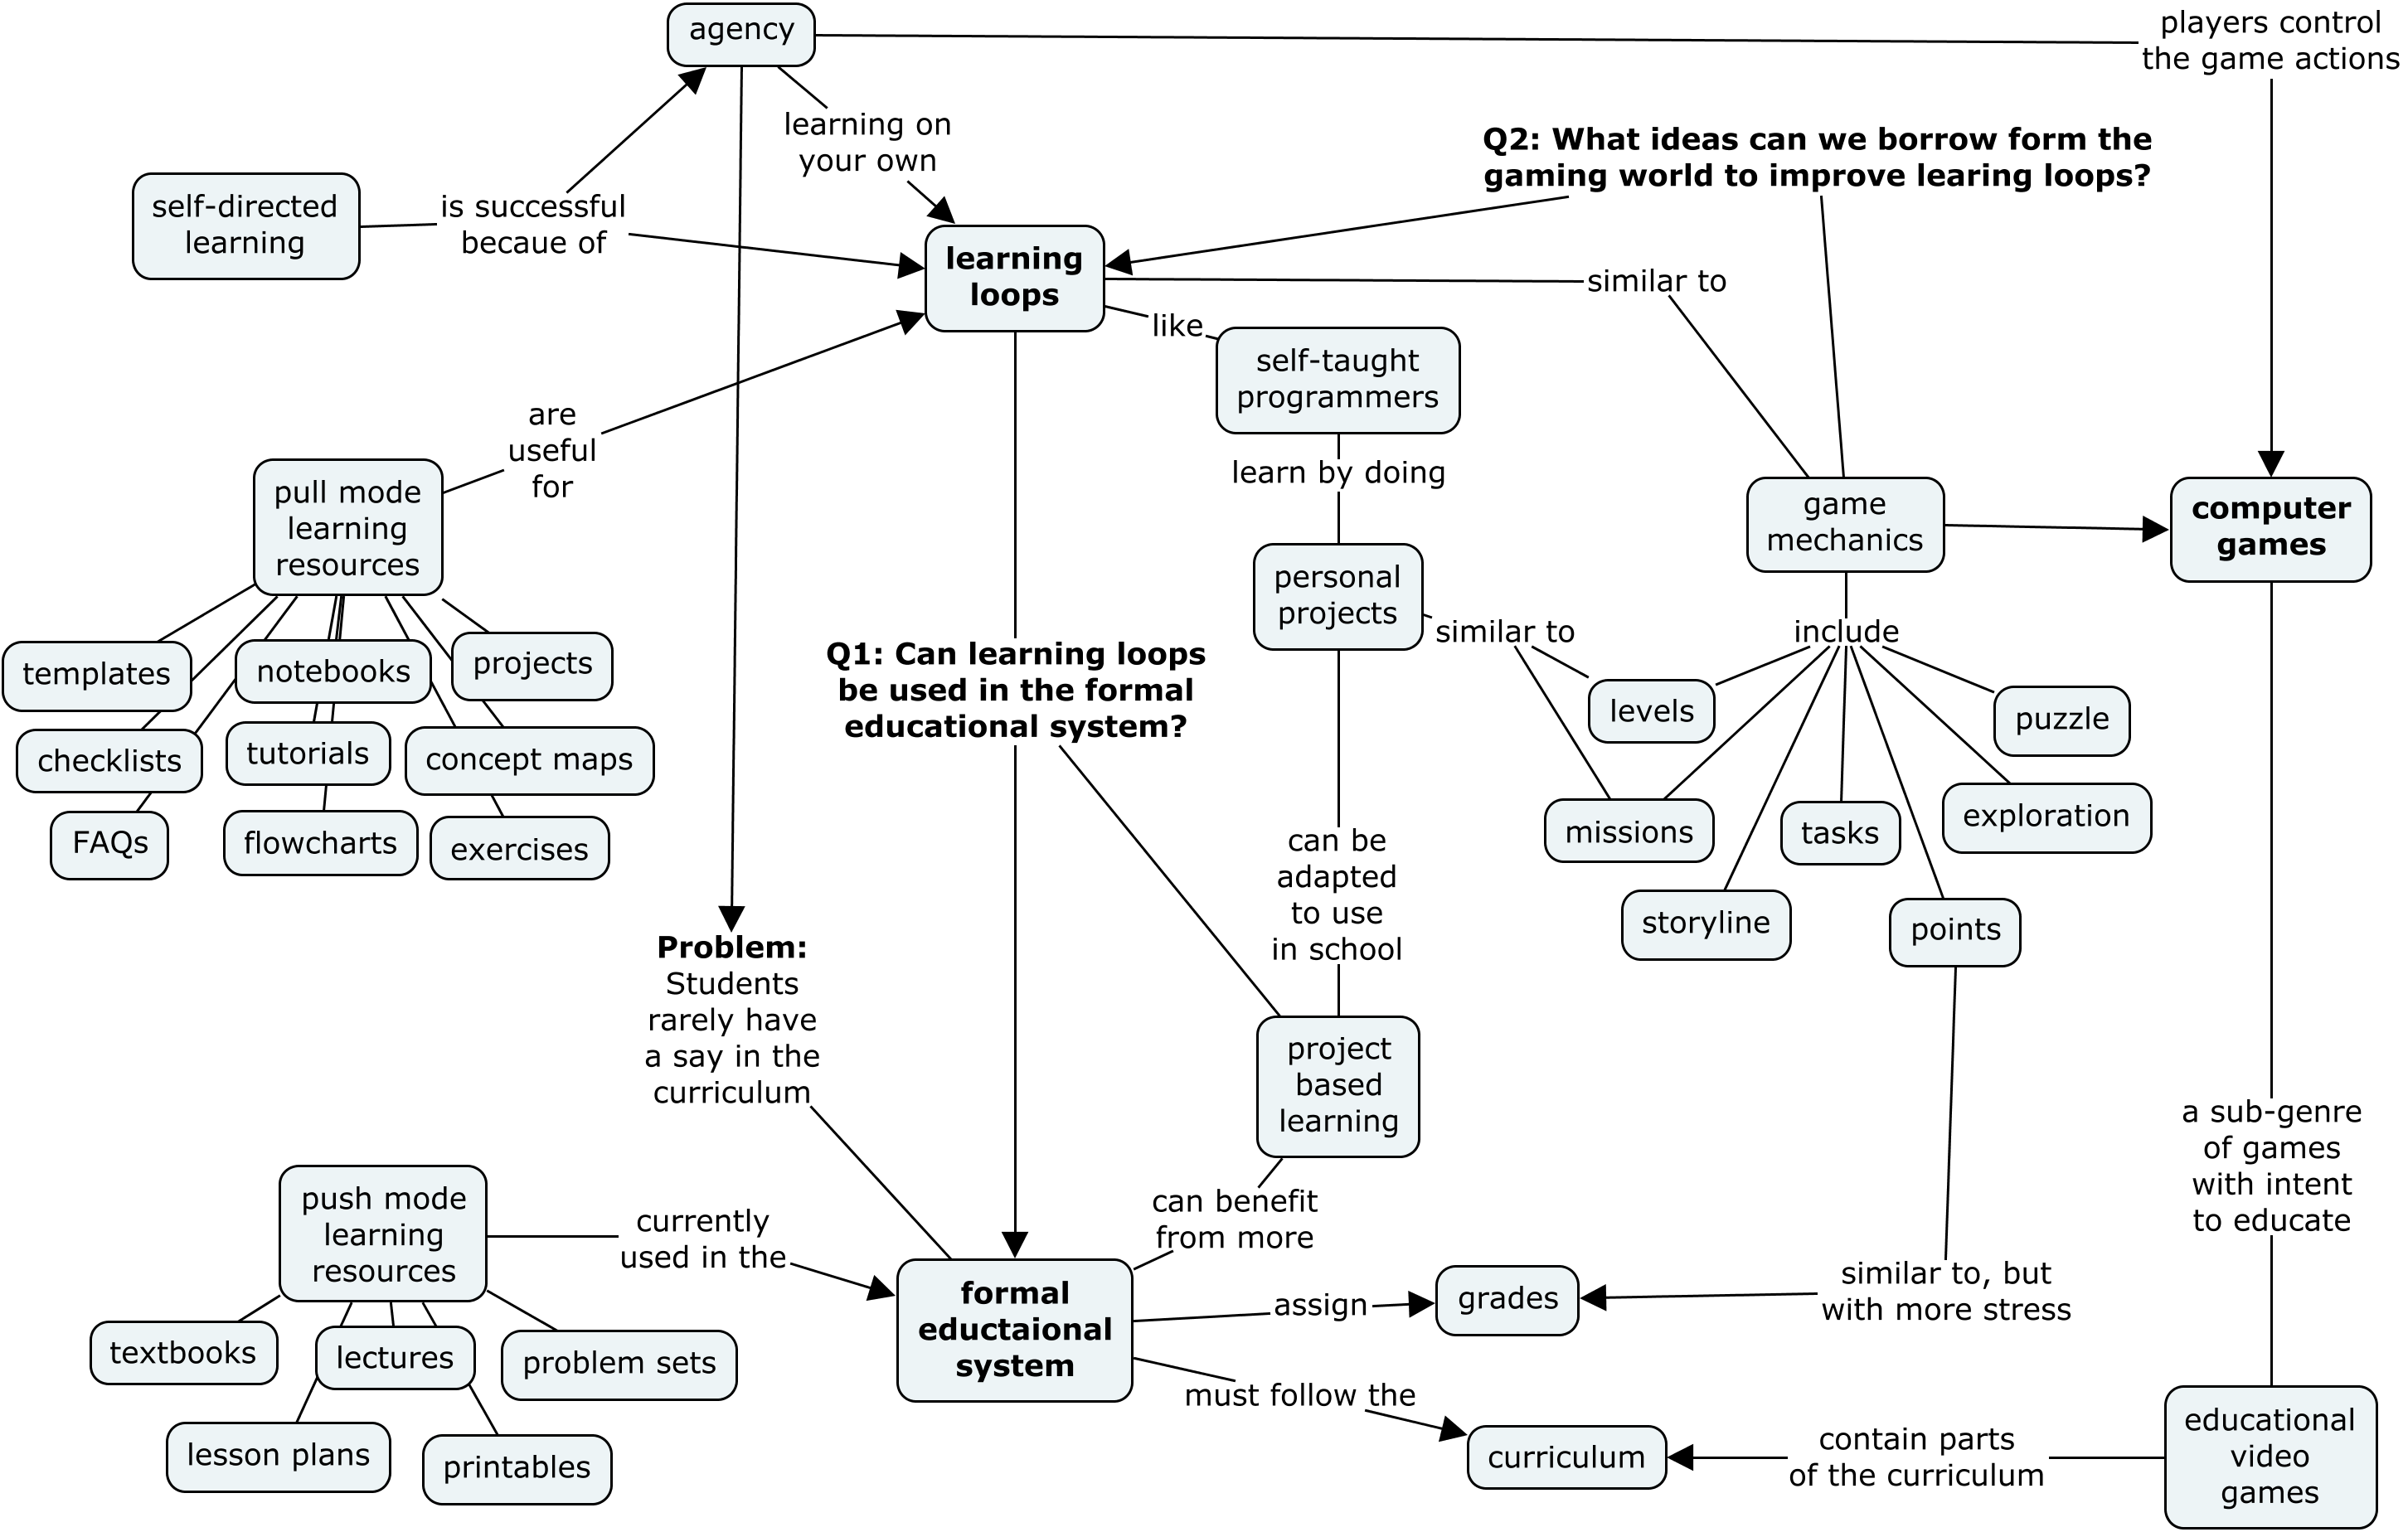 Concept map illustrating the ideas discussed in the blog post: learning loops and their relation to game-loops and potential uses in the formal educational system.